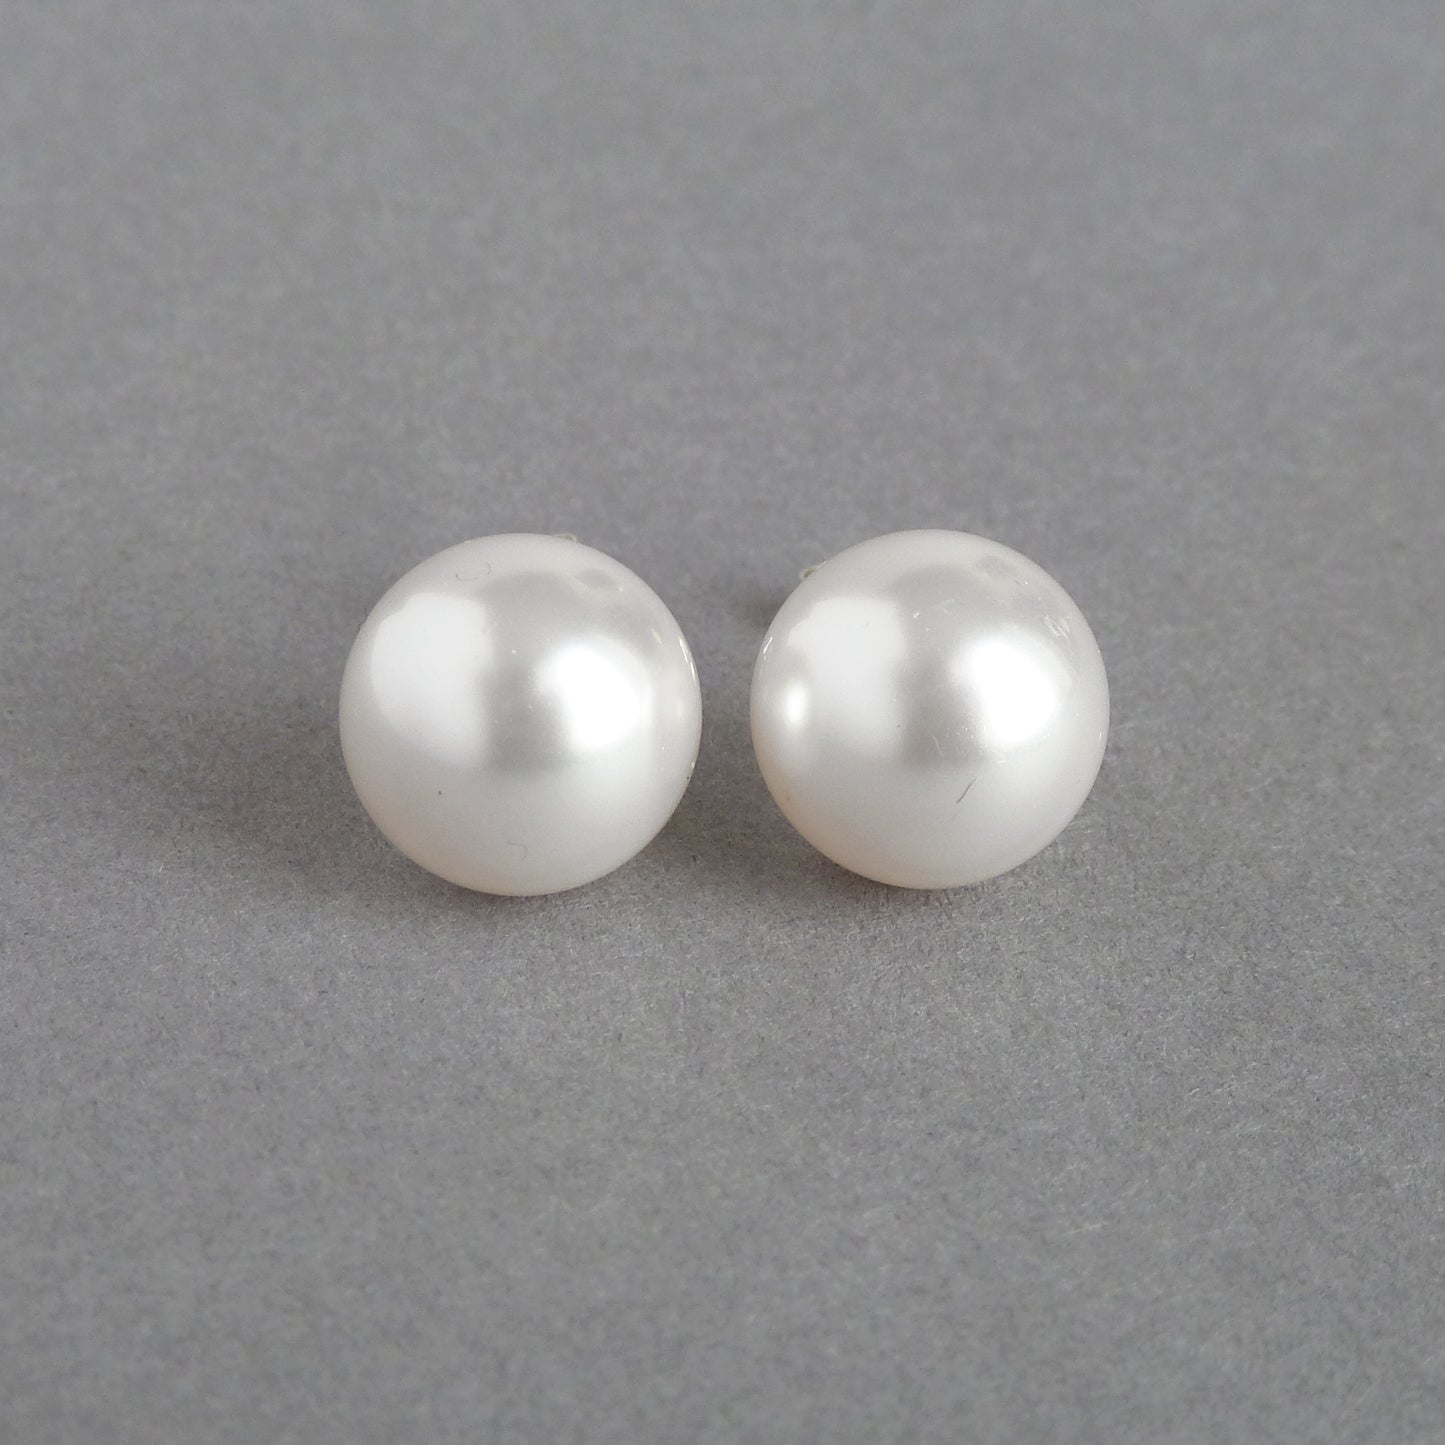 12mm Chunky White Pearl Studs - Round, Everyday, White Glass Pearl Stud Earrings